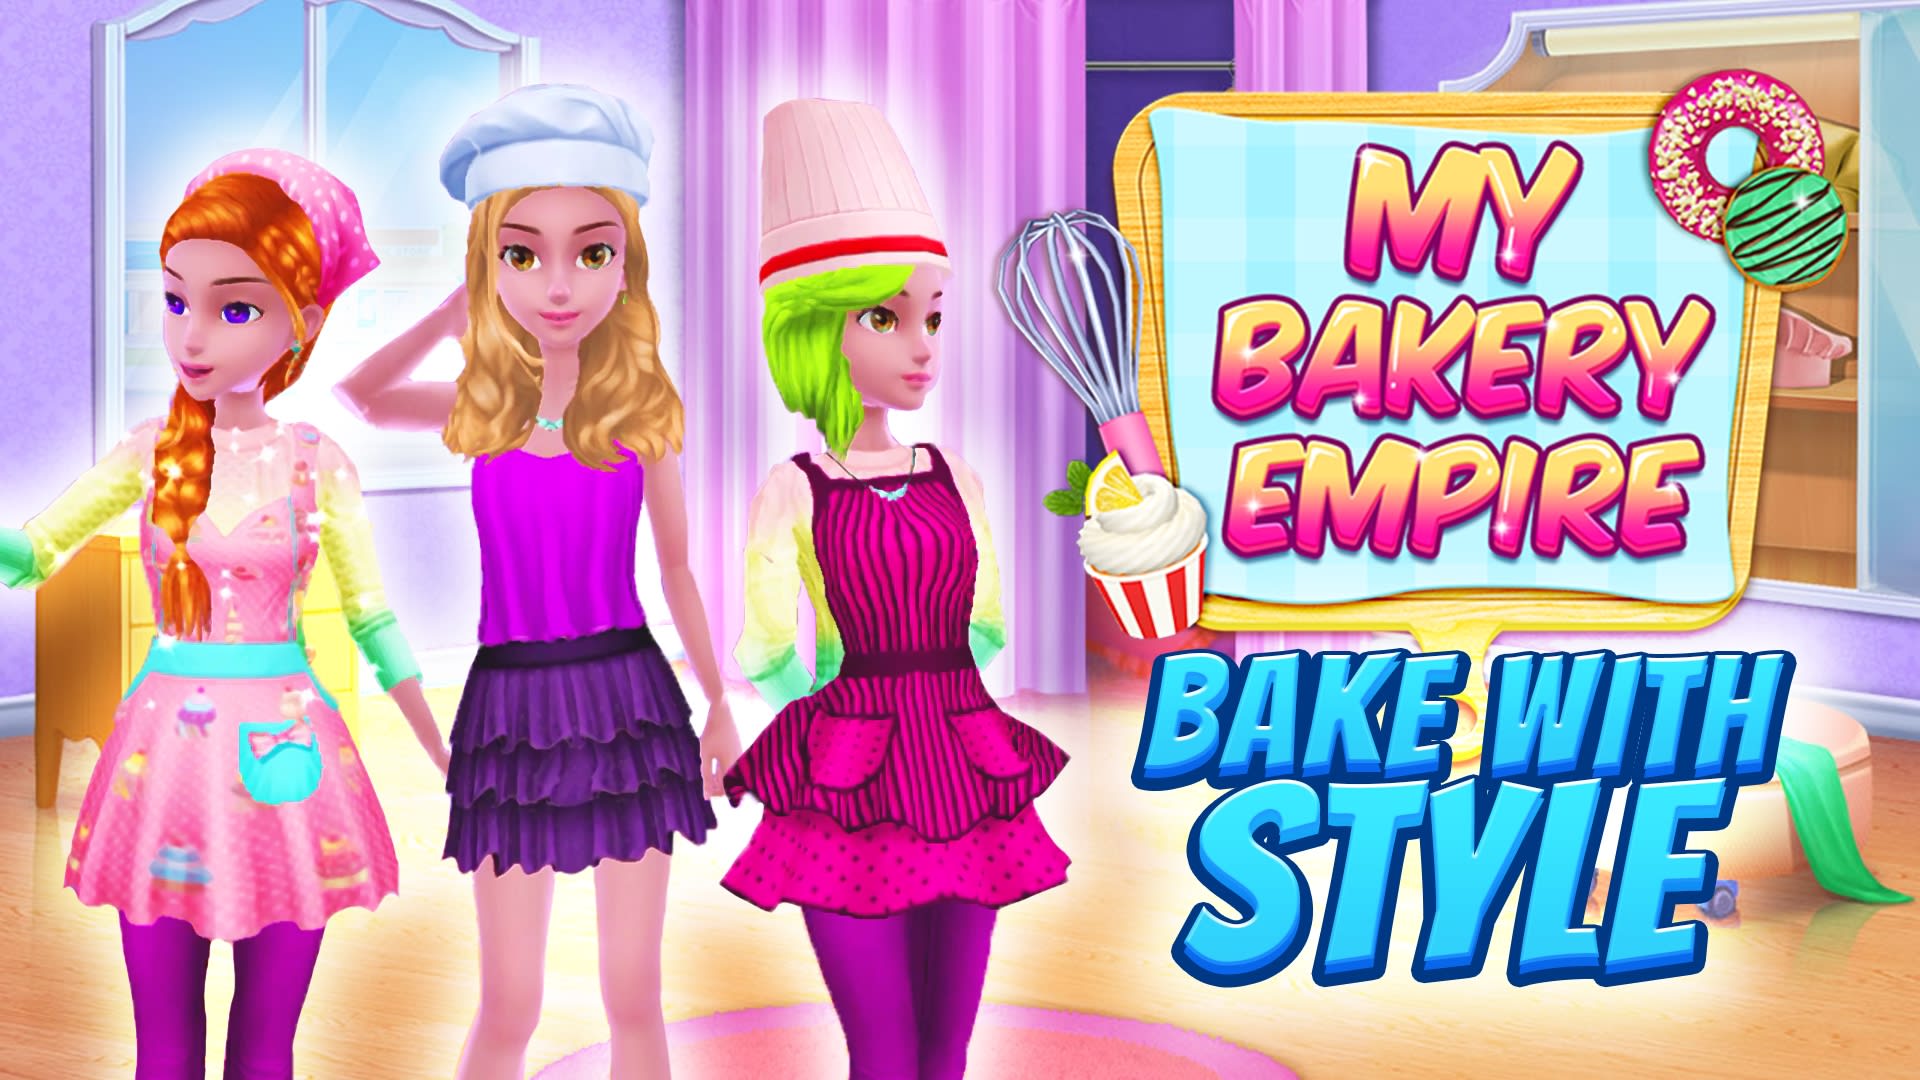 My Bakery Empire: Bake With Style DLC